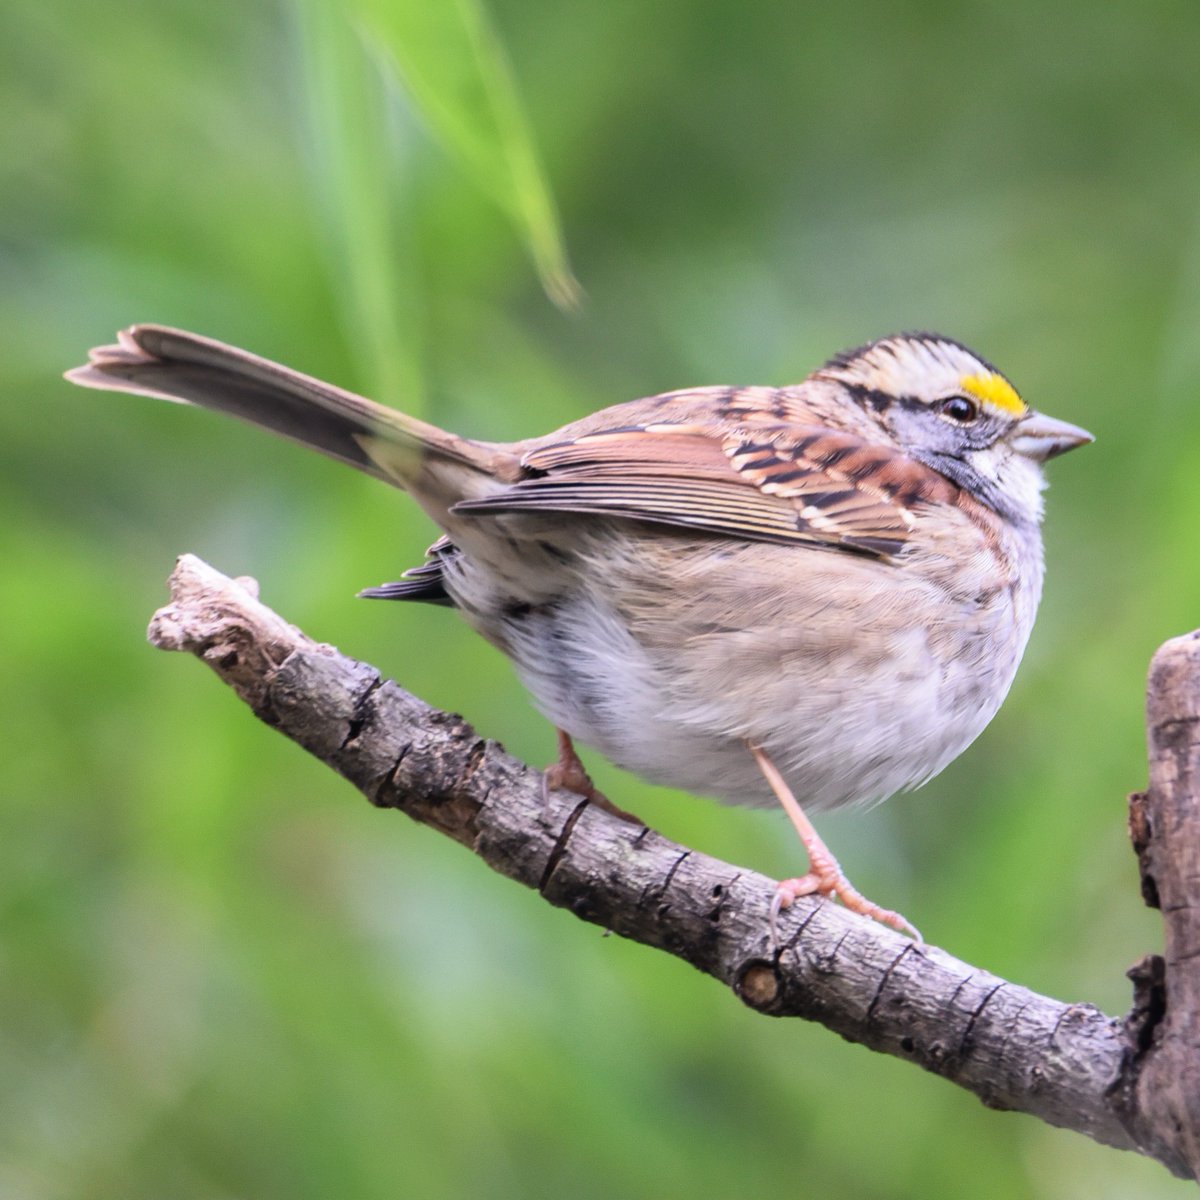 Although it was early in the Day The Head Sparrow in charge feels his Oats and assumes a Dashing pose.

#birdphoto #nature #naturephotography
#naturephoto #wildlife
#wildlifephotography #wildlifephotos
#greensboroboggarden #birdphotography #birds #bird #birding #birdsofinstagram